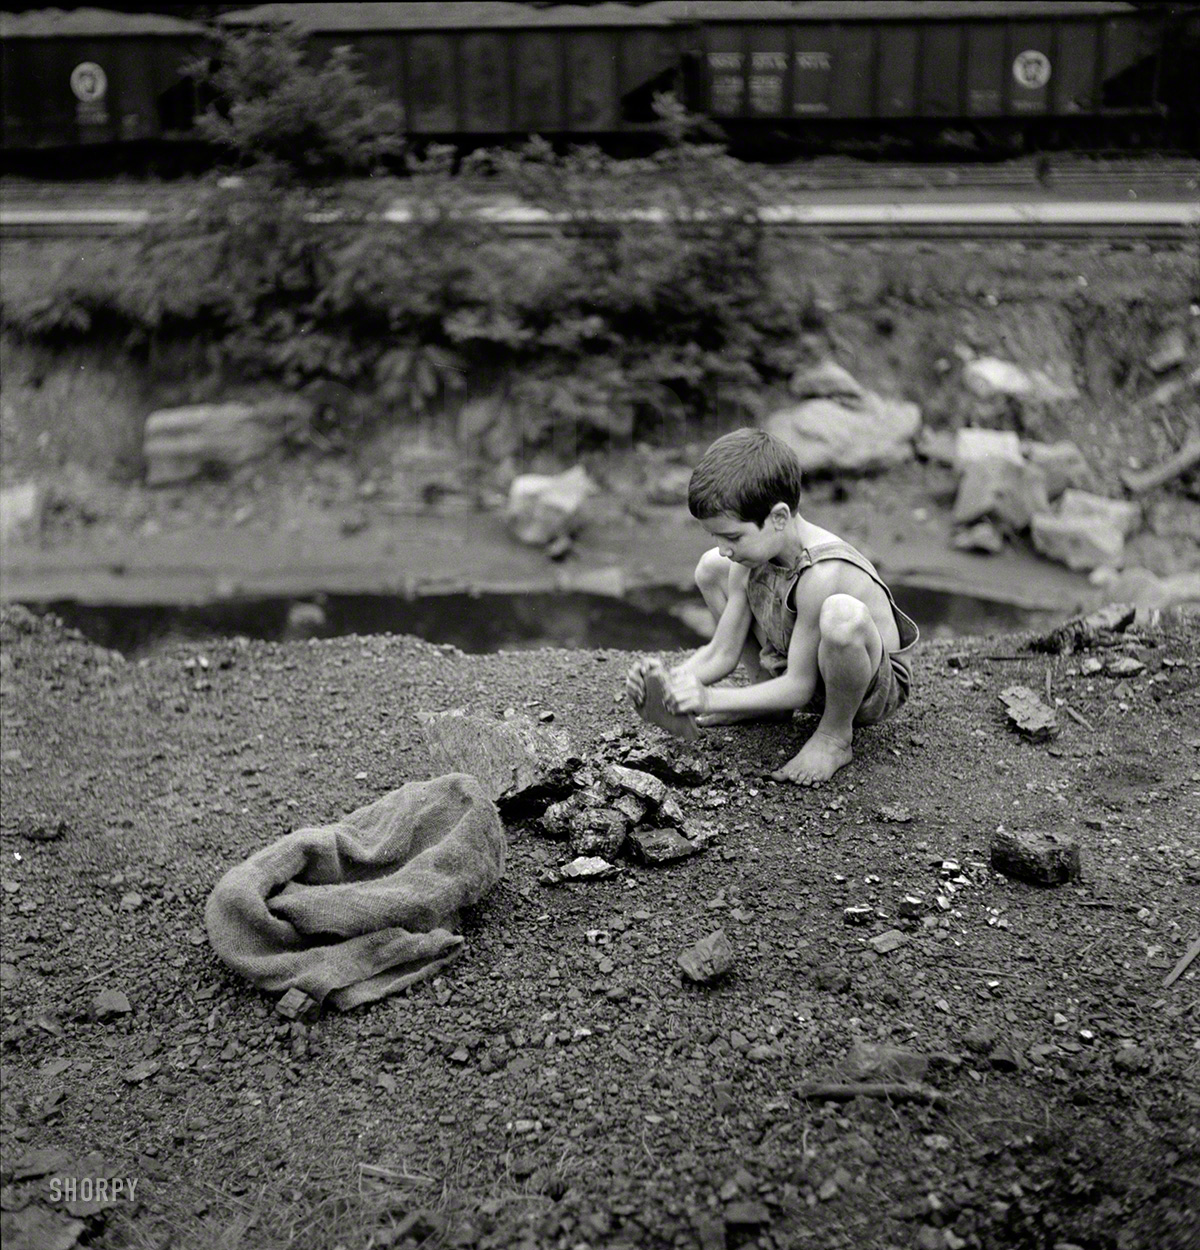 September 1938. "Coal miner's child breaking up large pieces of coal to take home. Pursglove, Scott's Run, West Virginia." Photo by Marion Post Wolcott for the Resettlement Administration. View full size.